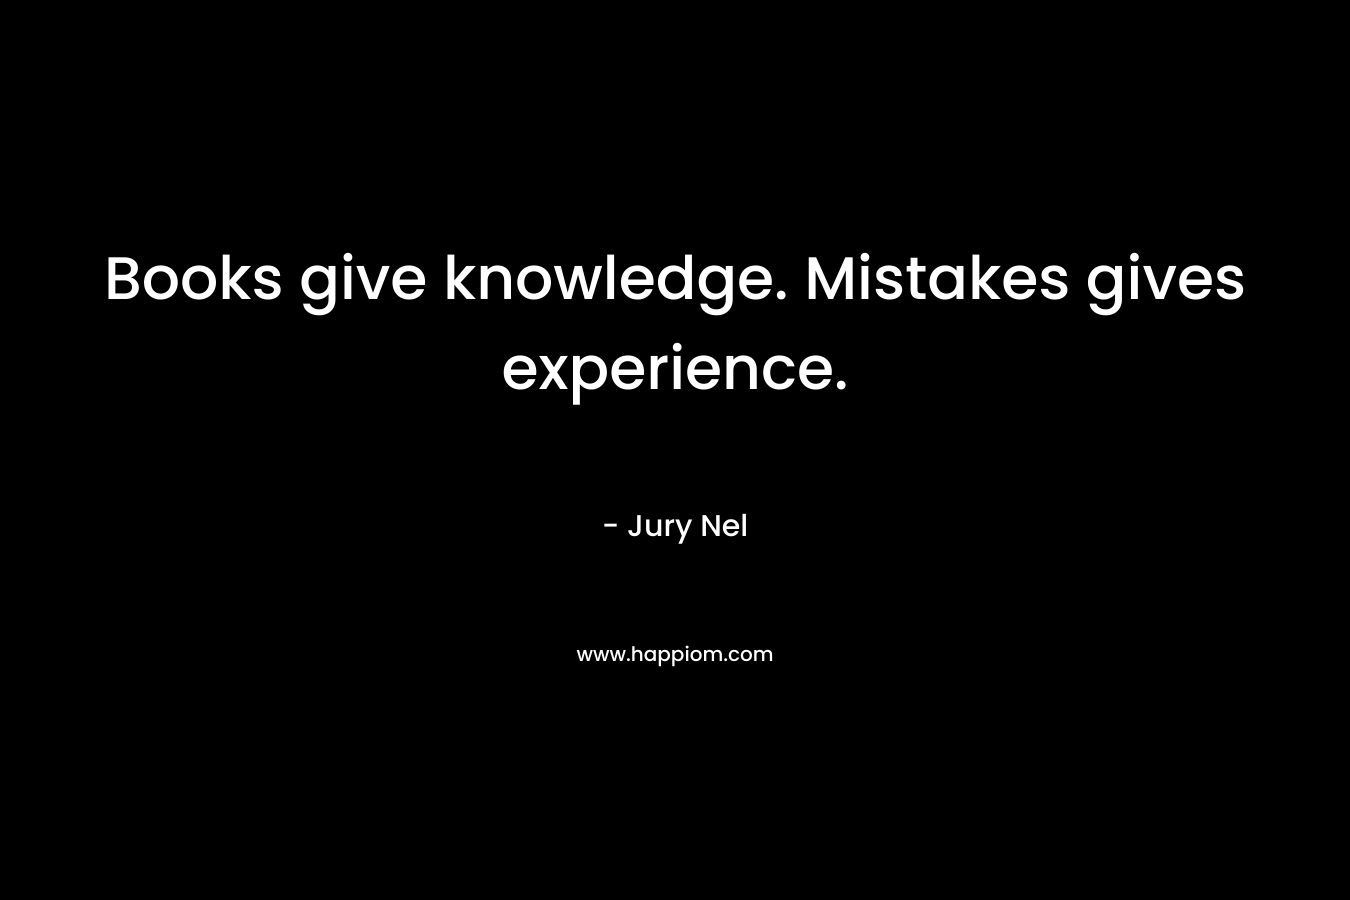 Books give knowledge. Mistakes gives experience.